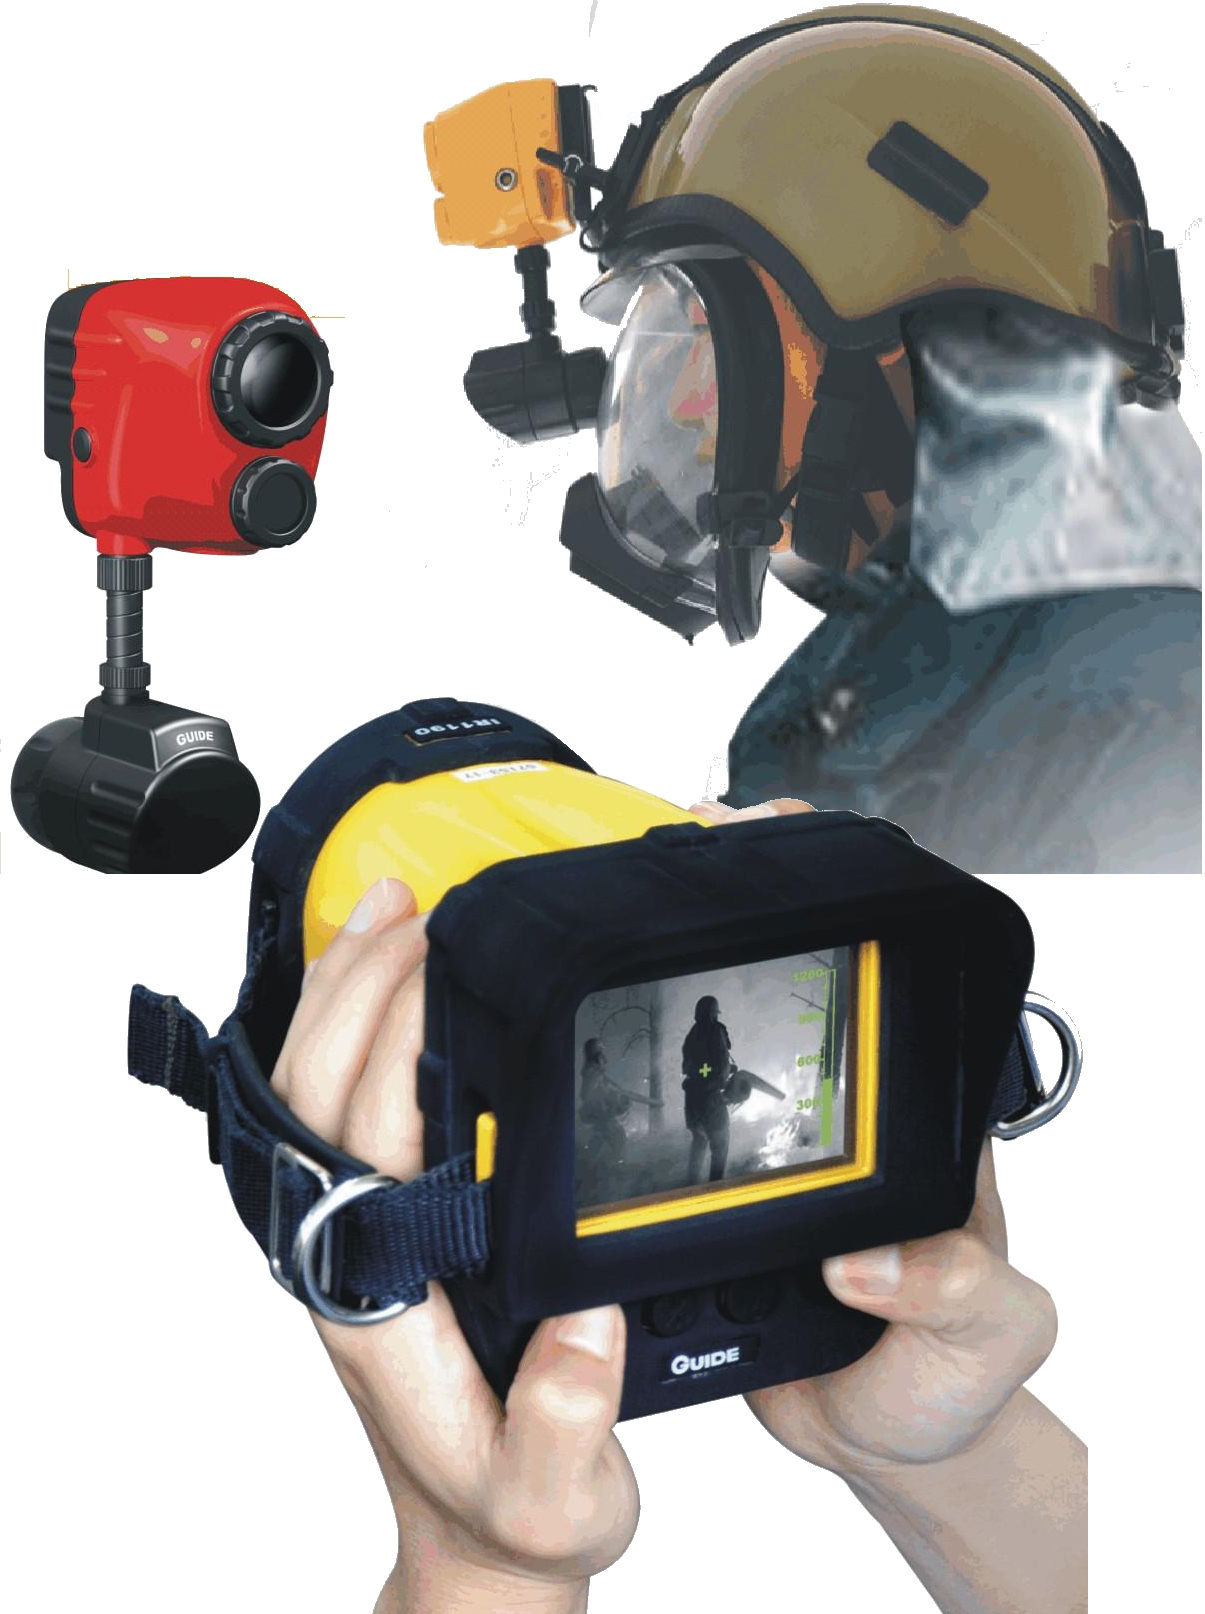 Fire Fighting Thermal Camera Manufacturer & Manufacturer from, India | ID - 165736